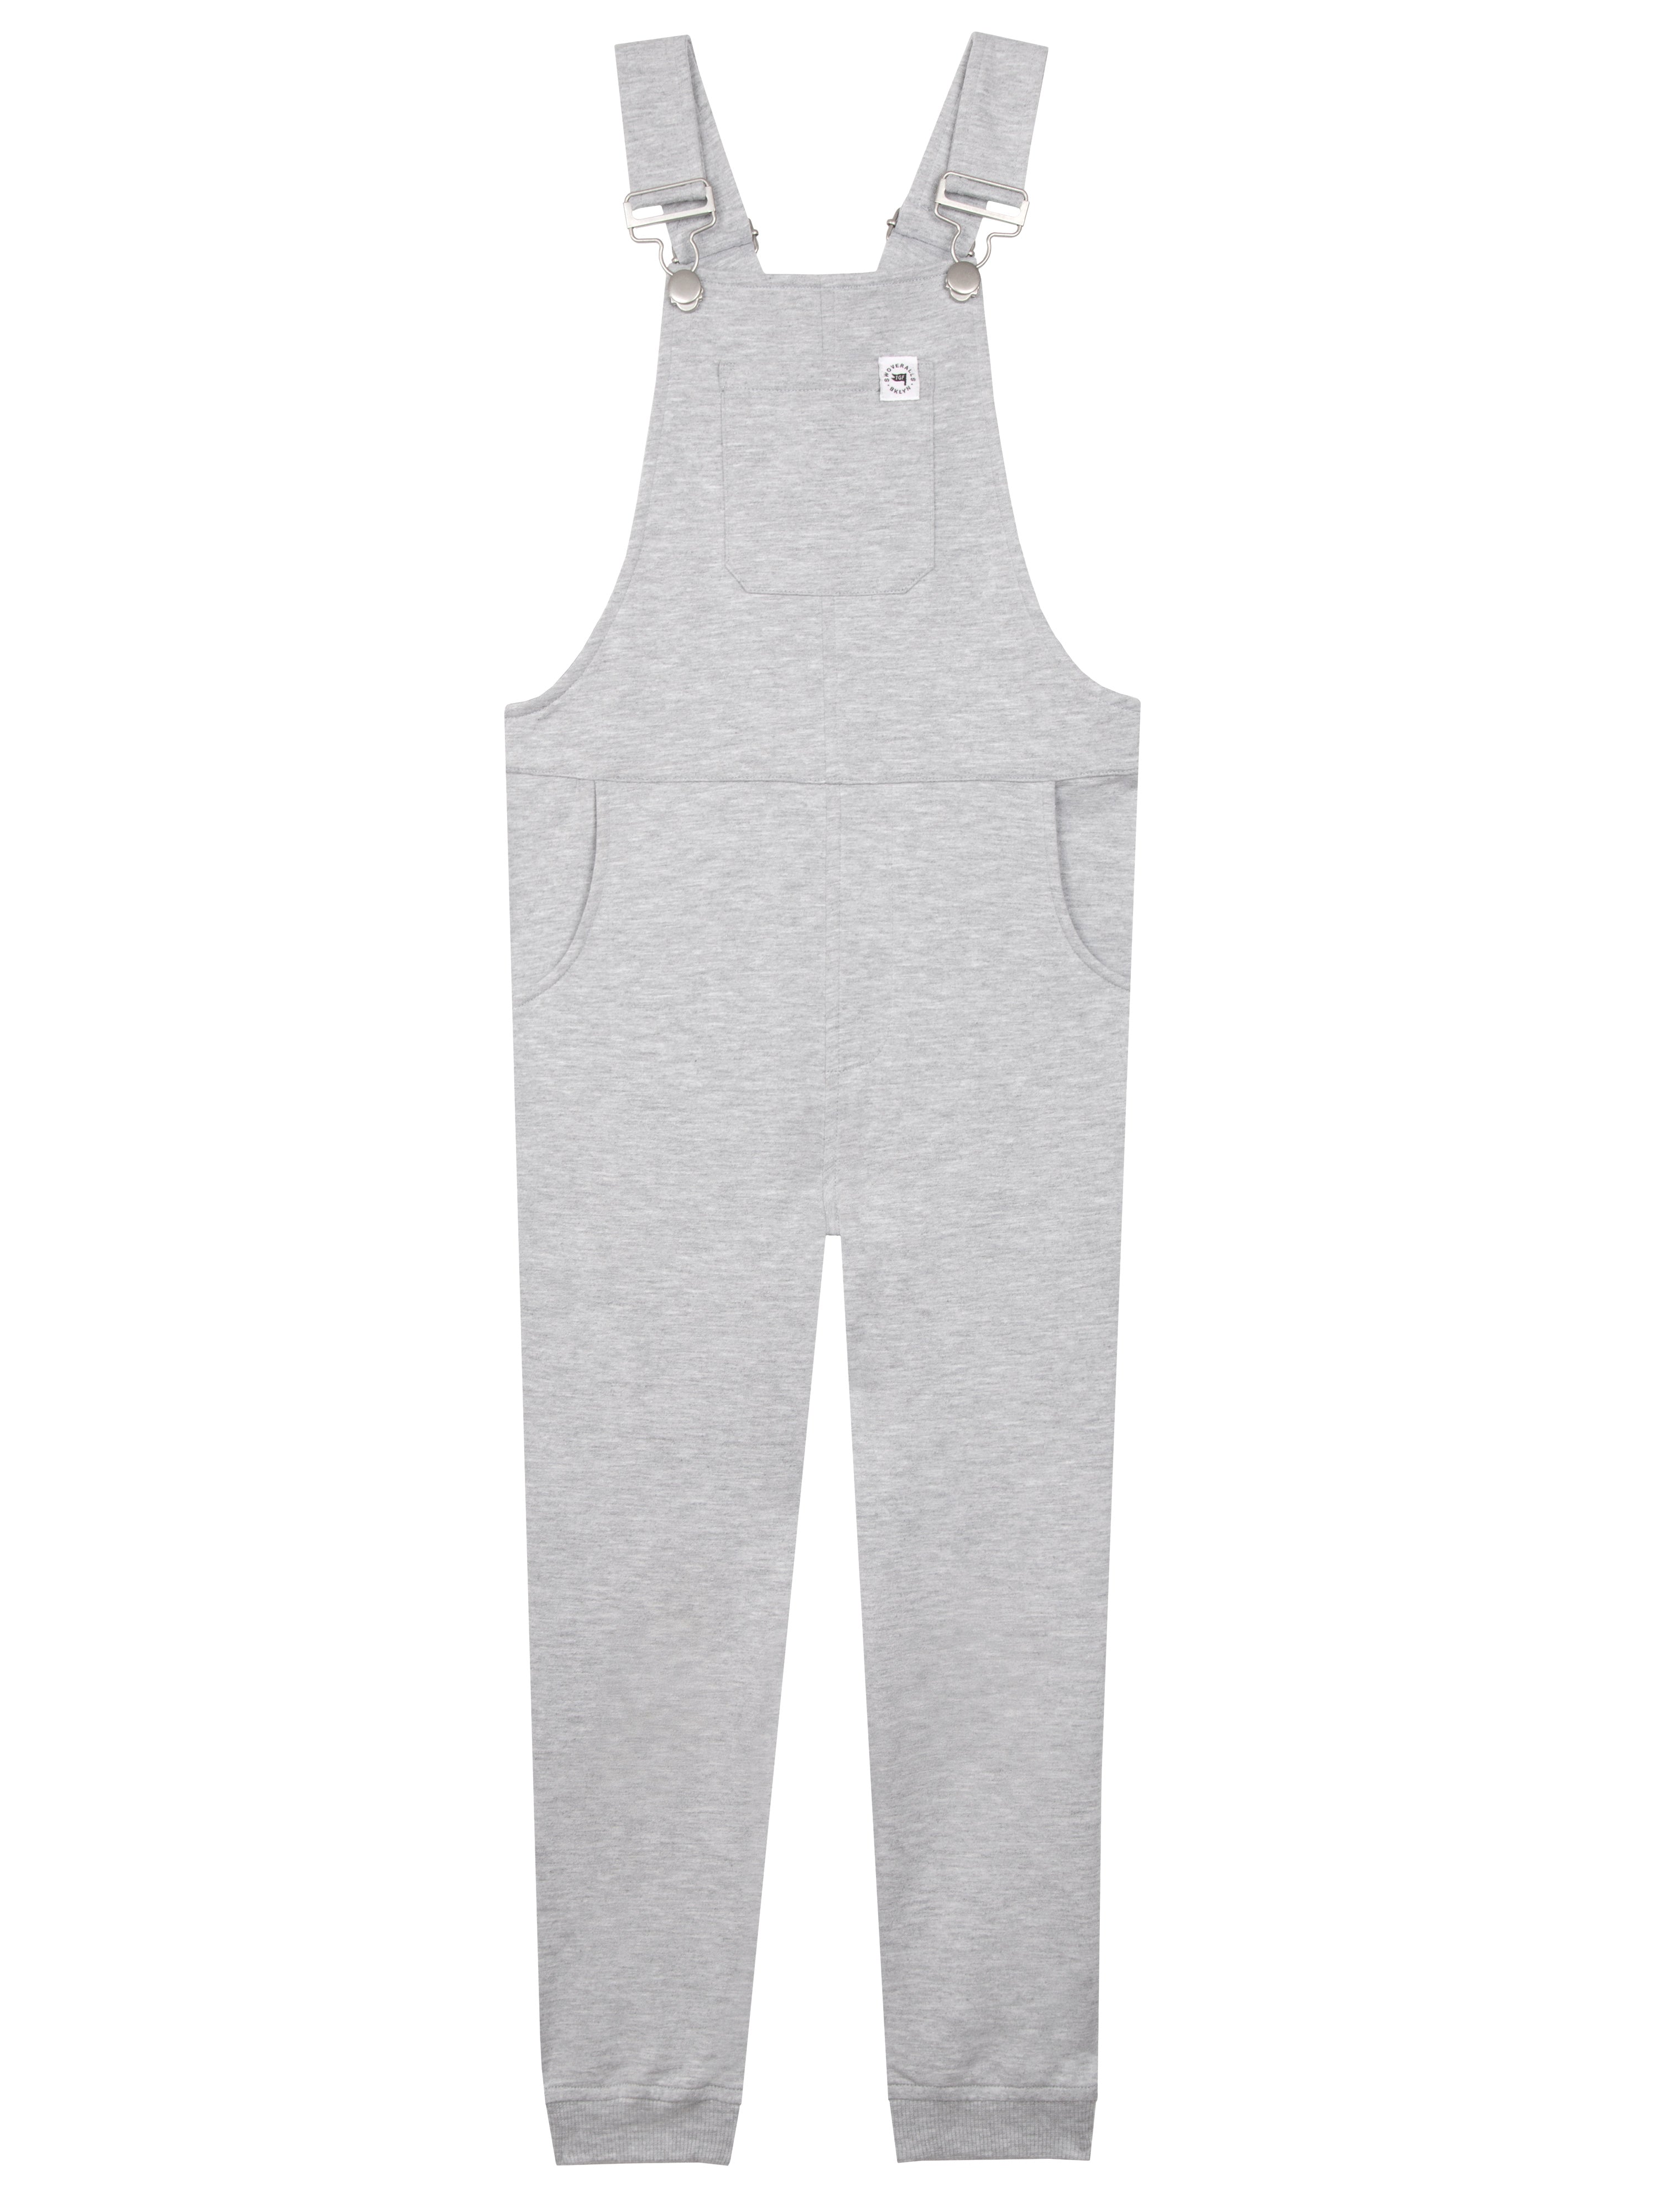  Swoveralls Kids Overalls, Sweatpant Overalls/Bib for Boys &  Girls, Size 4, Light Heather Grey, Organic Cotton Blend, Kid's Overall,  Relaxed Fit Kid Bib Overall: Clothing, Shoes & Jewelry